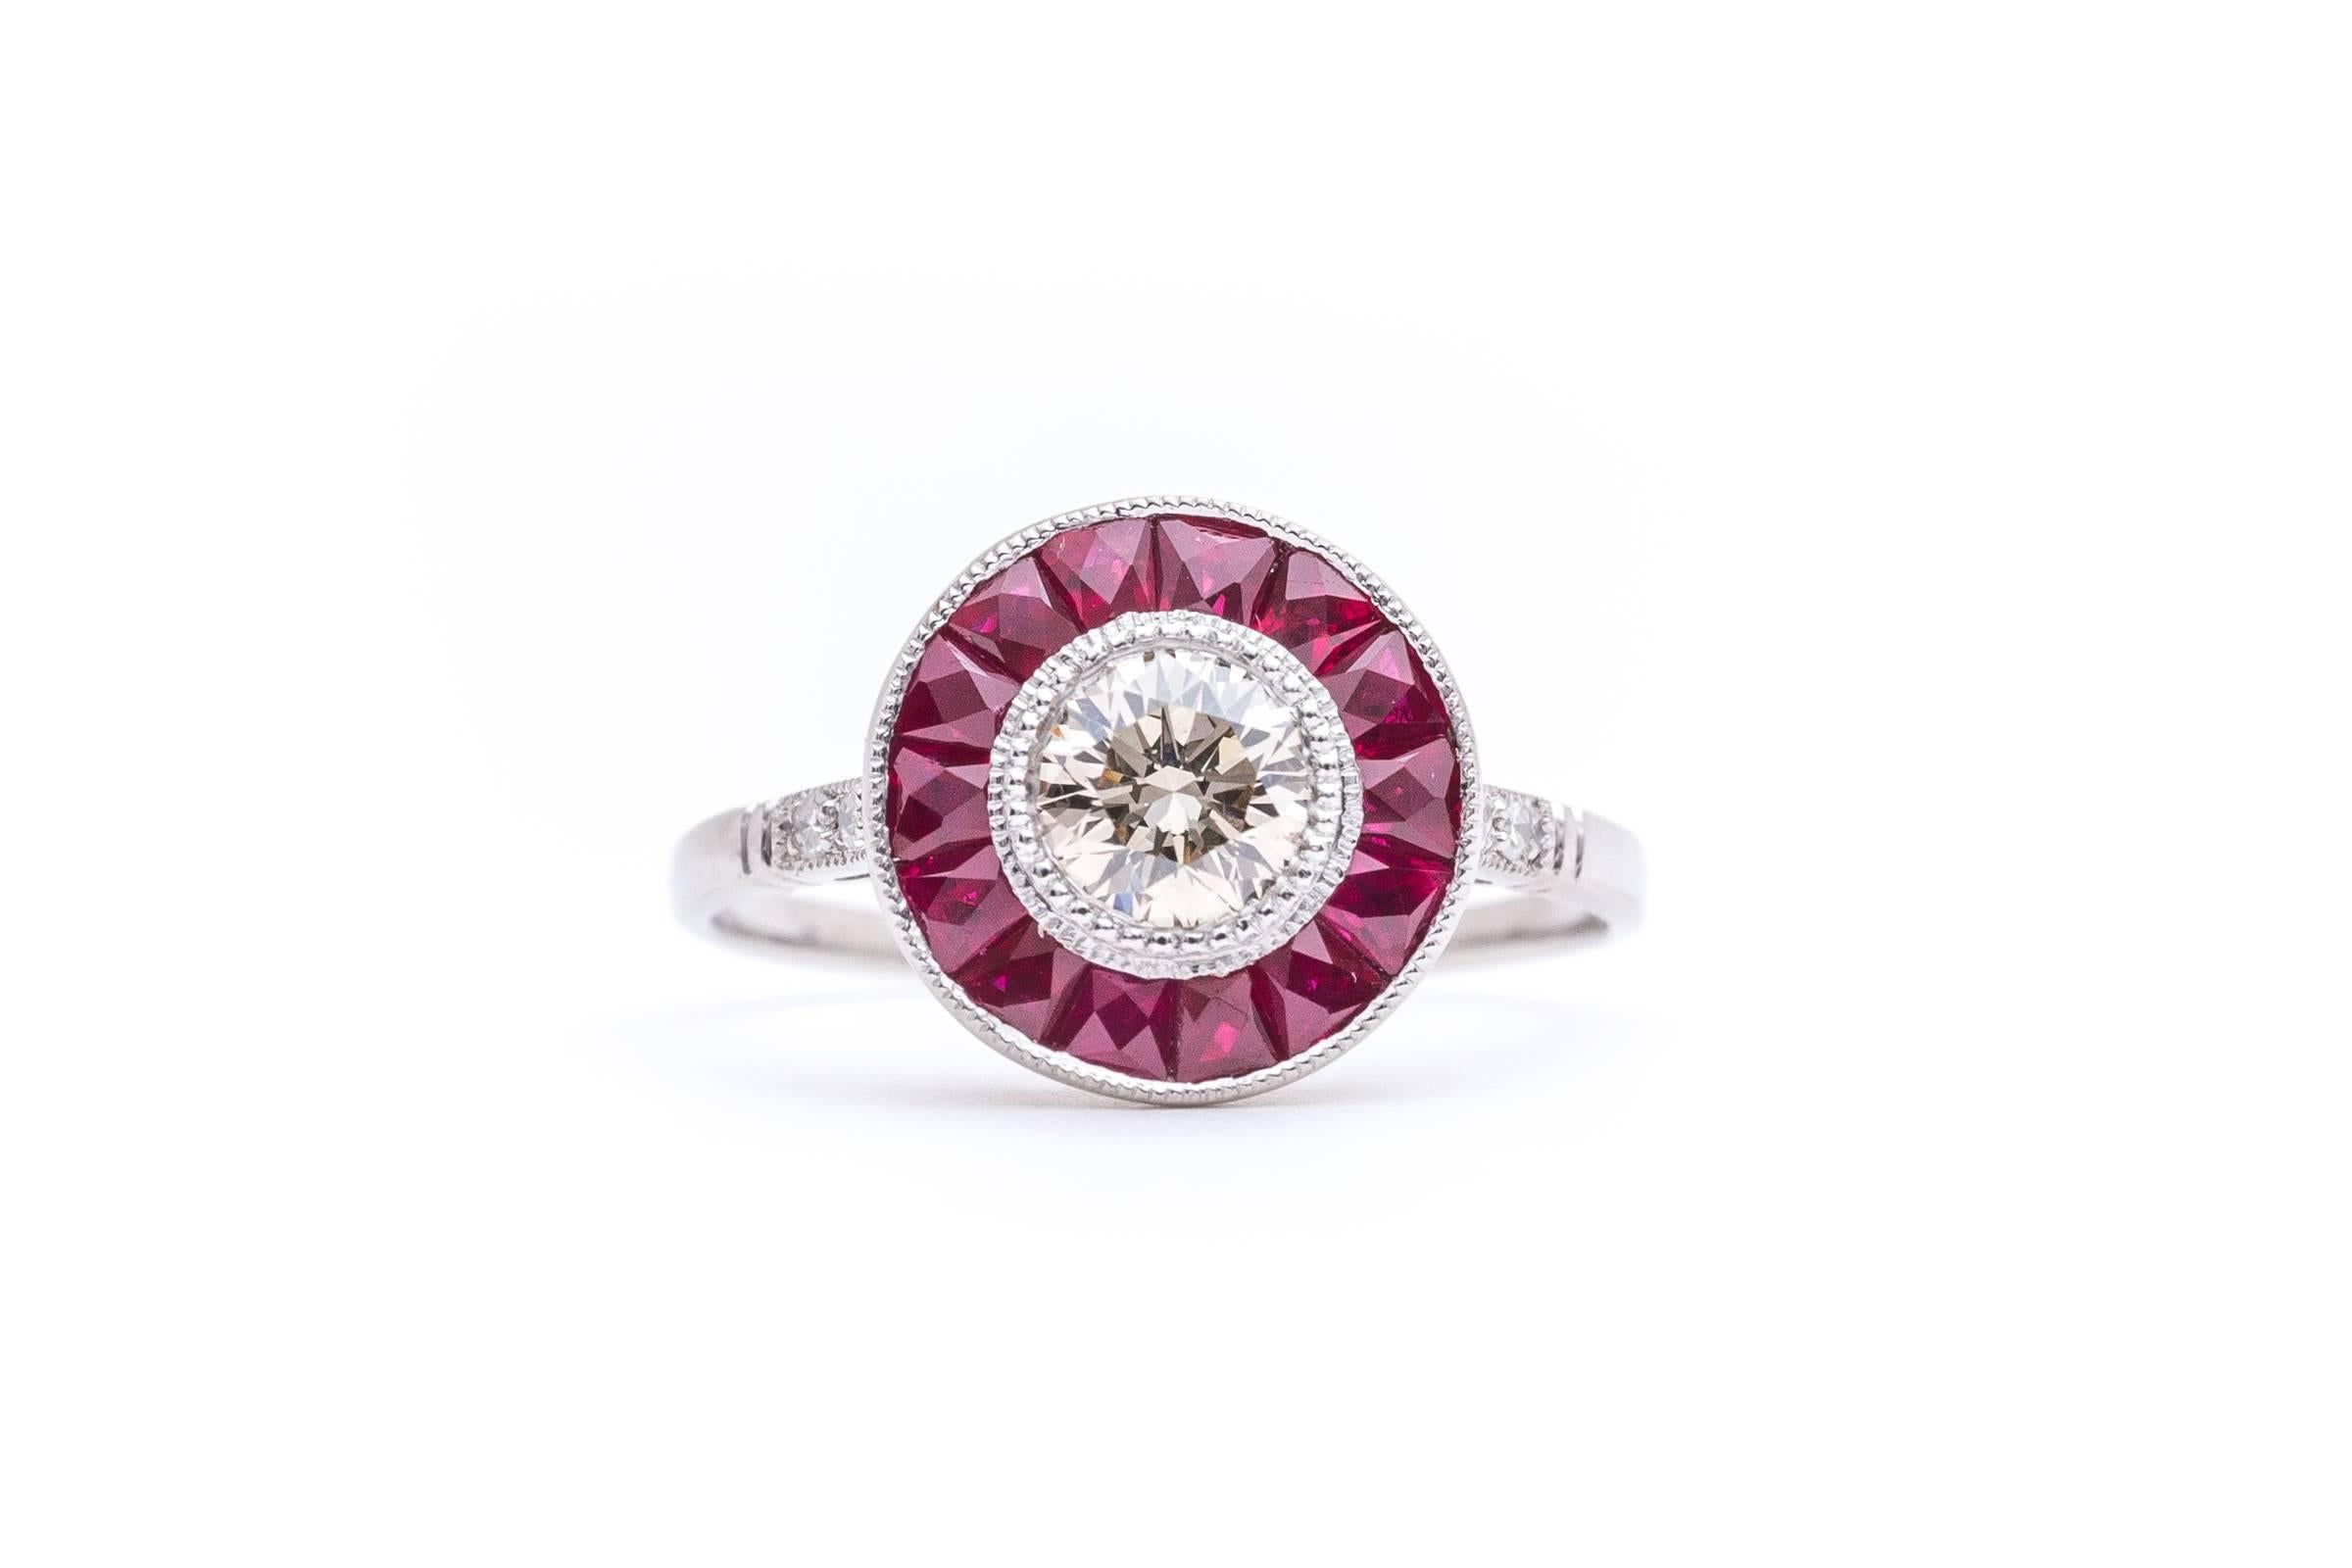 A stunning champagne diamond and ruby target ring in luxurious platinum. Completely hand crafted, this stunning target ring is a prime example of a French style engagement ring. Centered by a natural fancy champagne diamond surrounded by vivid red